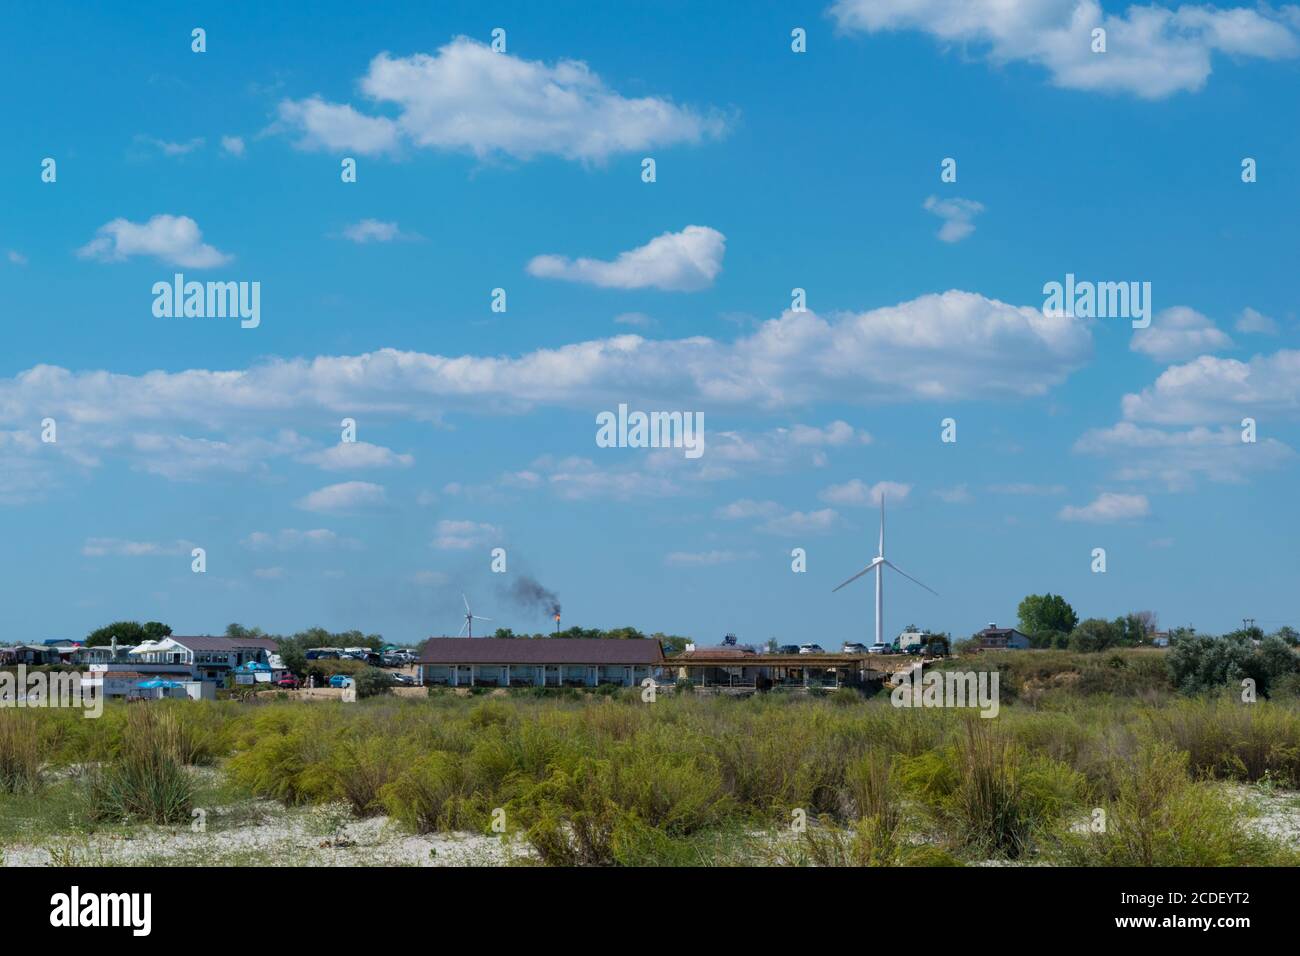 Corbu, Constanta, Romania - August 18, 2019: Buildings powered with green electricity generated by windmils at Corbu Beach, Romania. Stock Photo